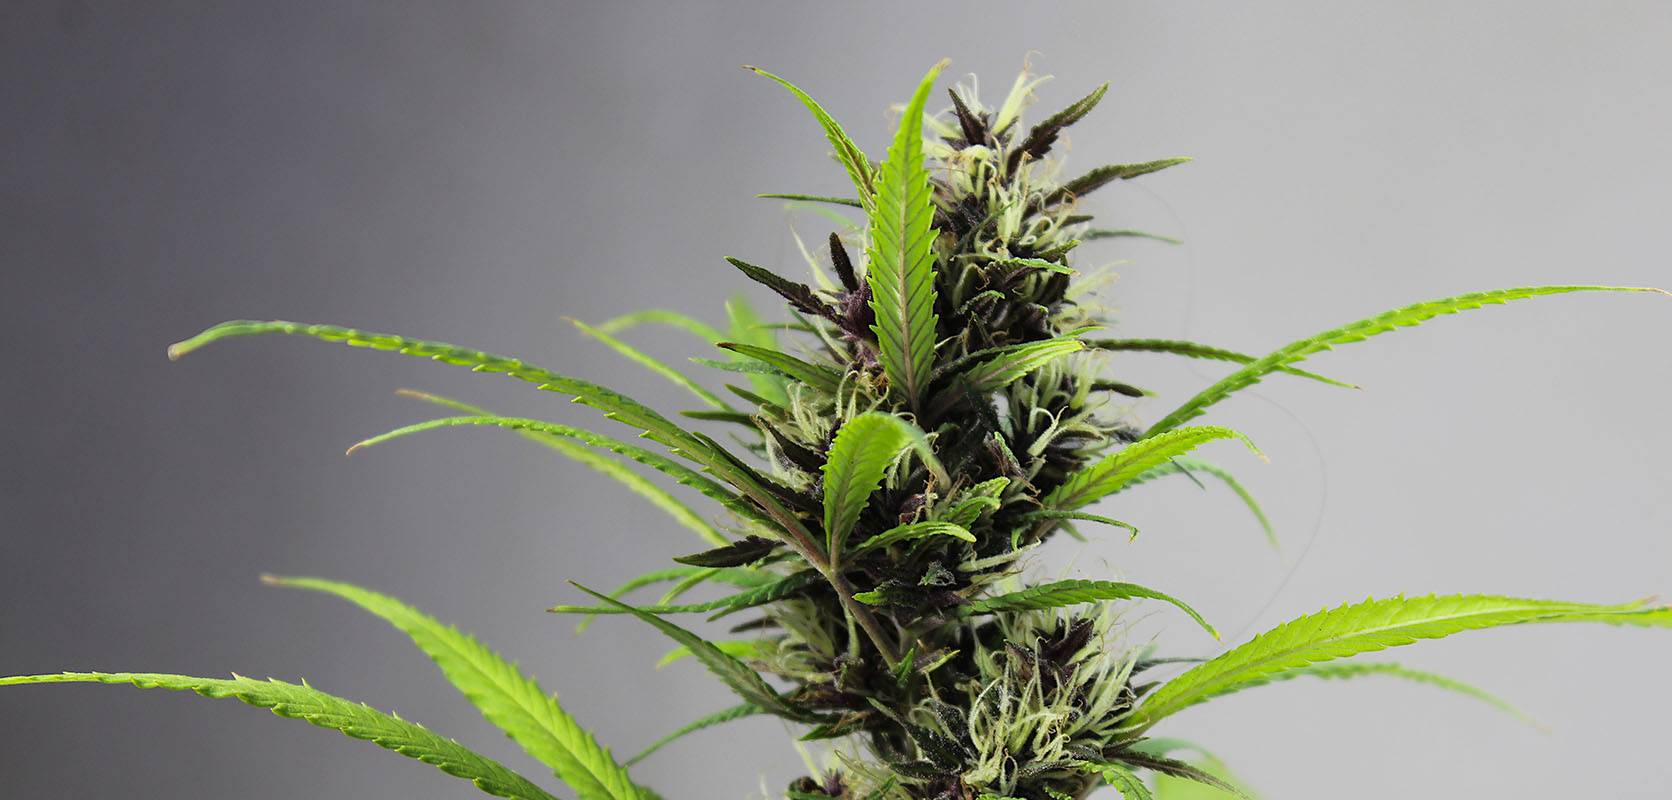 Cannabis plant growing Black Widow strain weed for sale online in Canada. Weed dispensary for mail order marijuana, value buds, edibles online and dispensary weed.